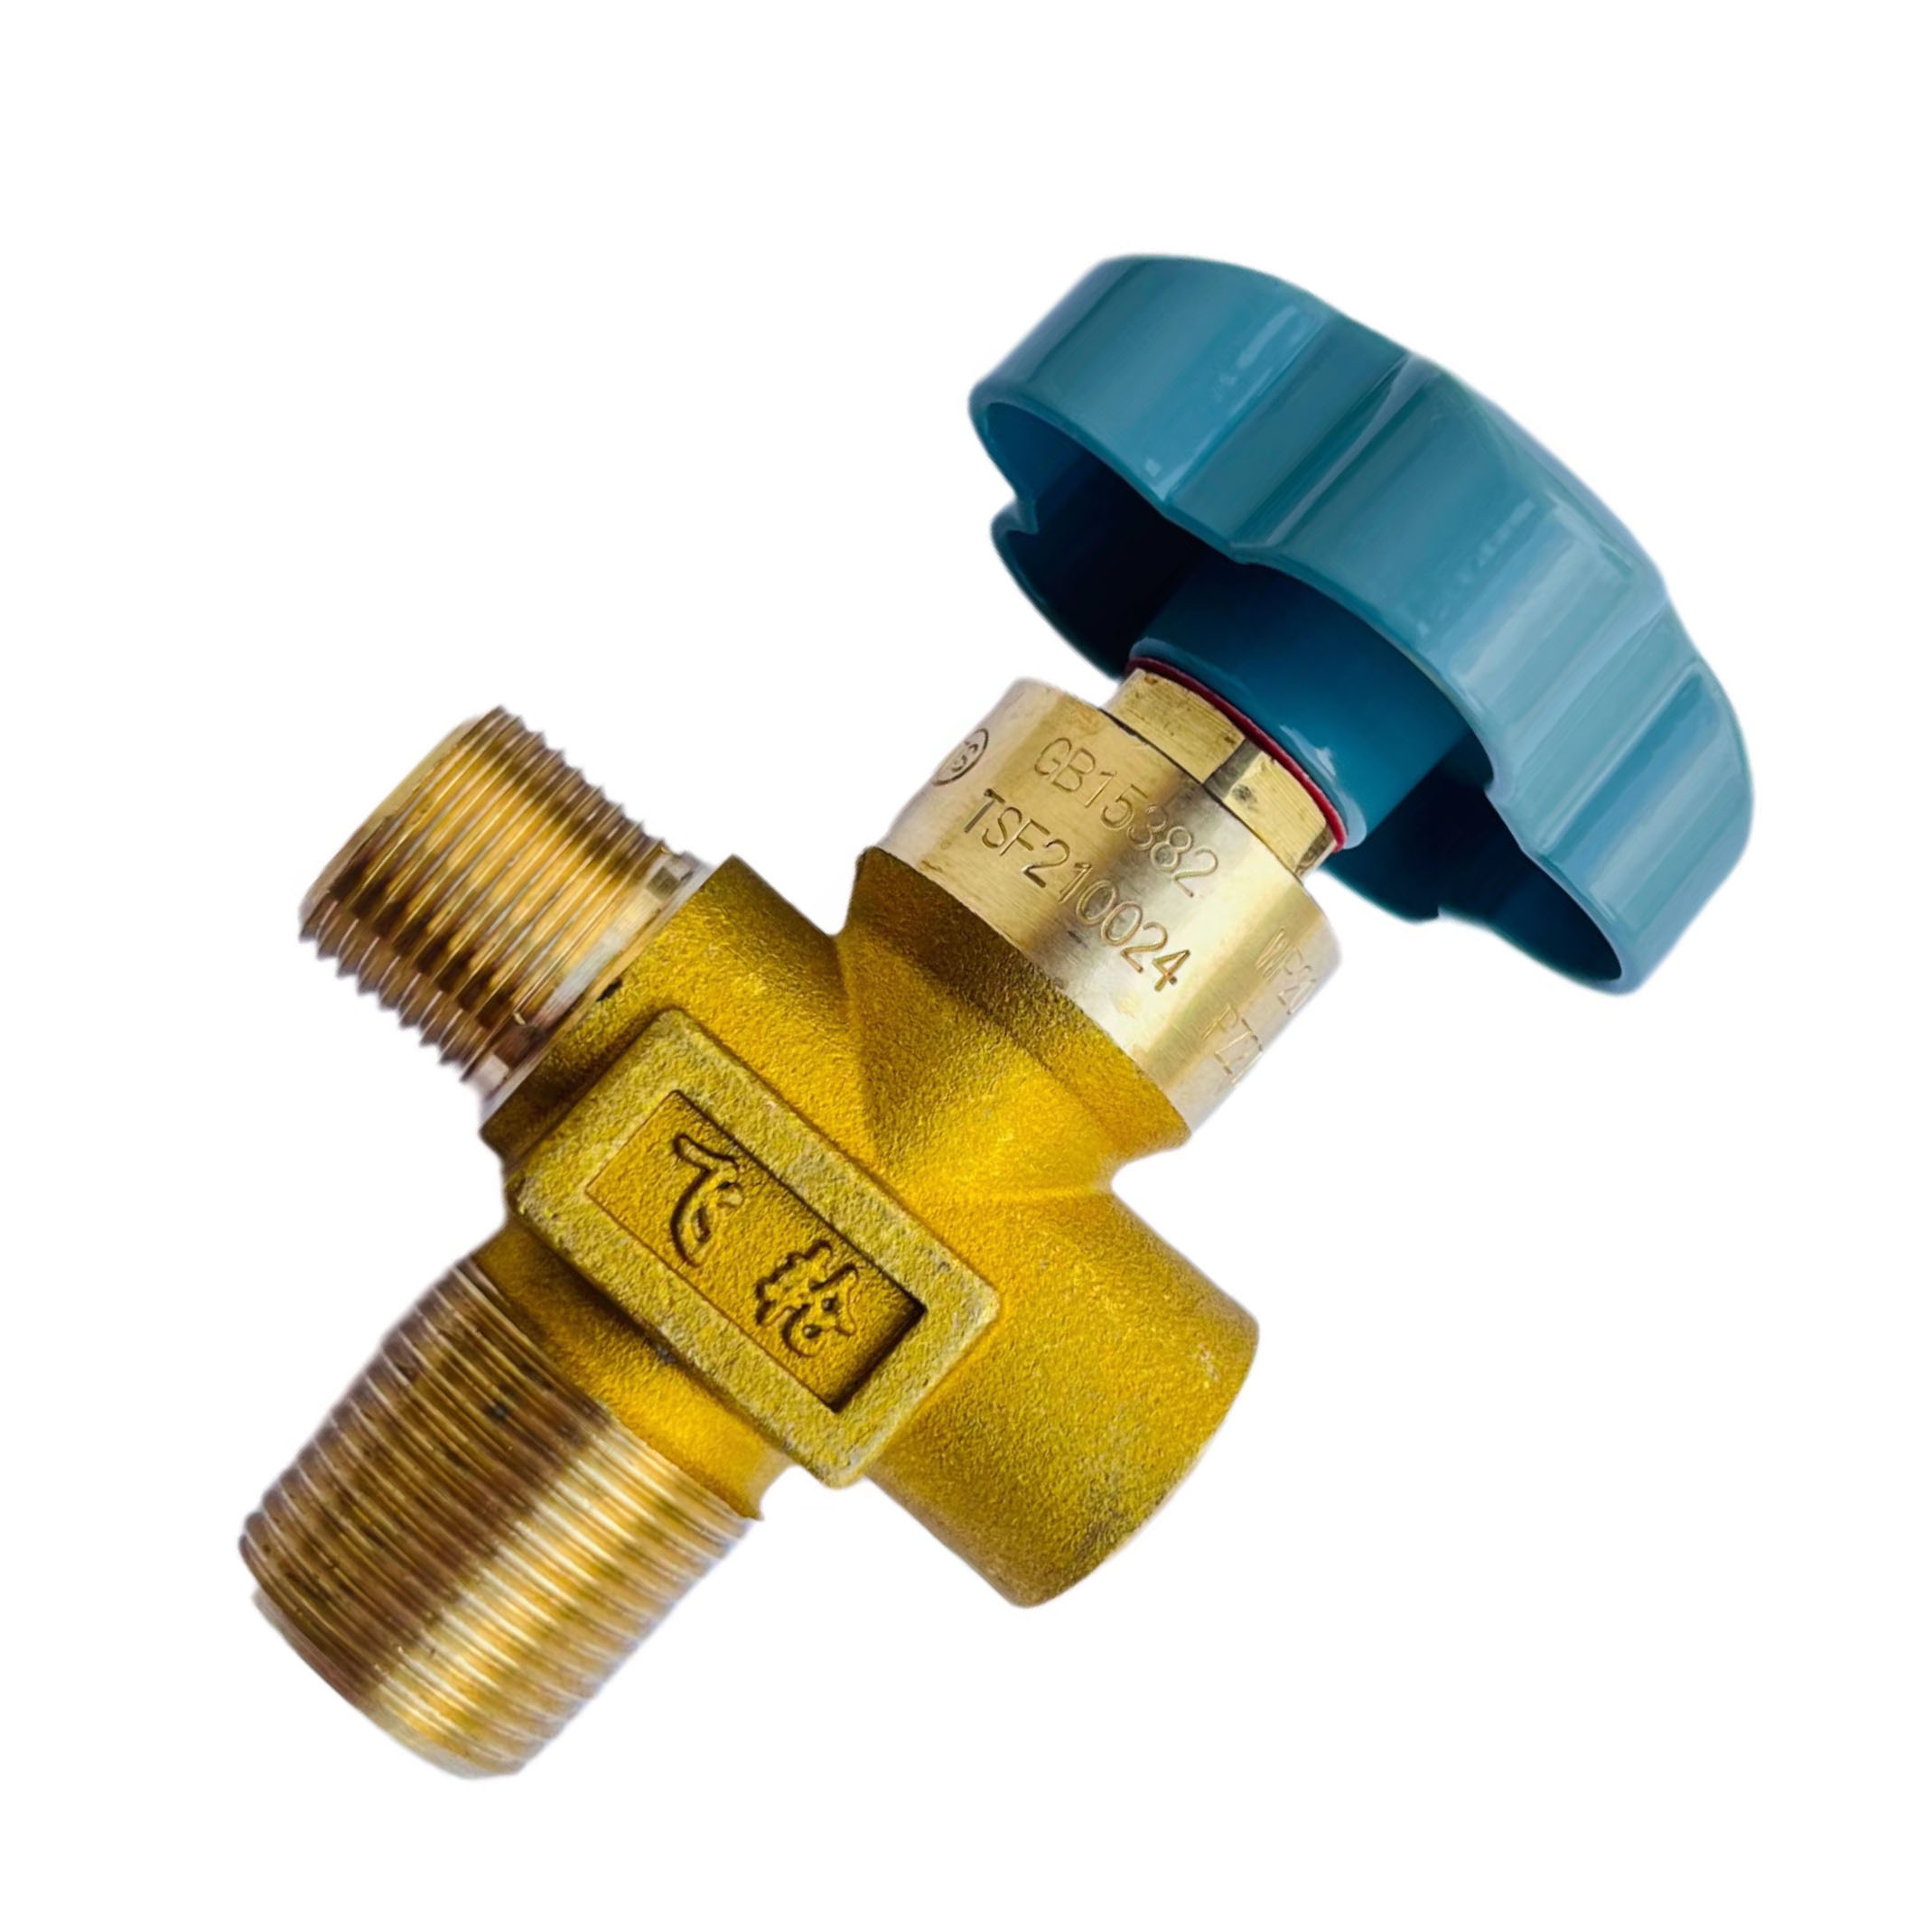 BYF-3 Oxygen Cylinder Residual Pressure Valve for Pressure Holding Function